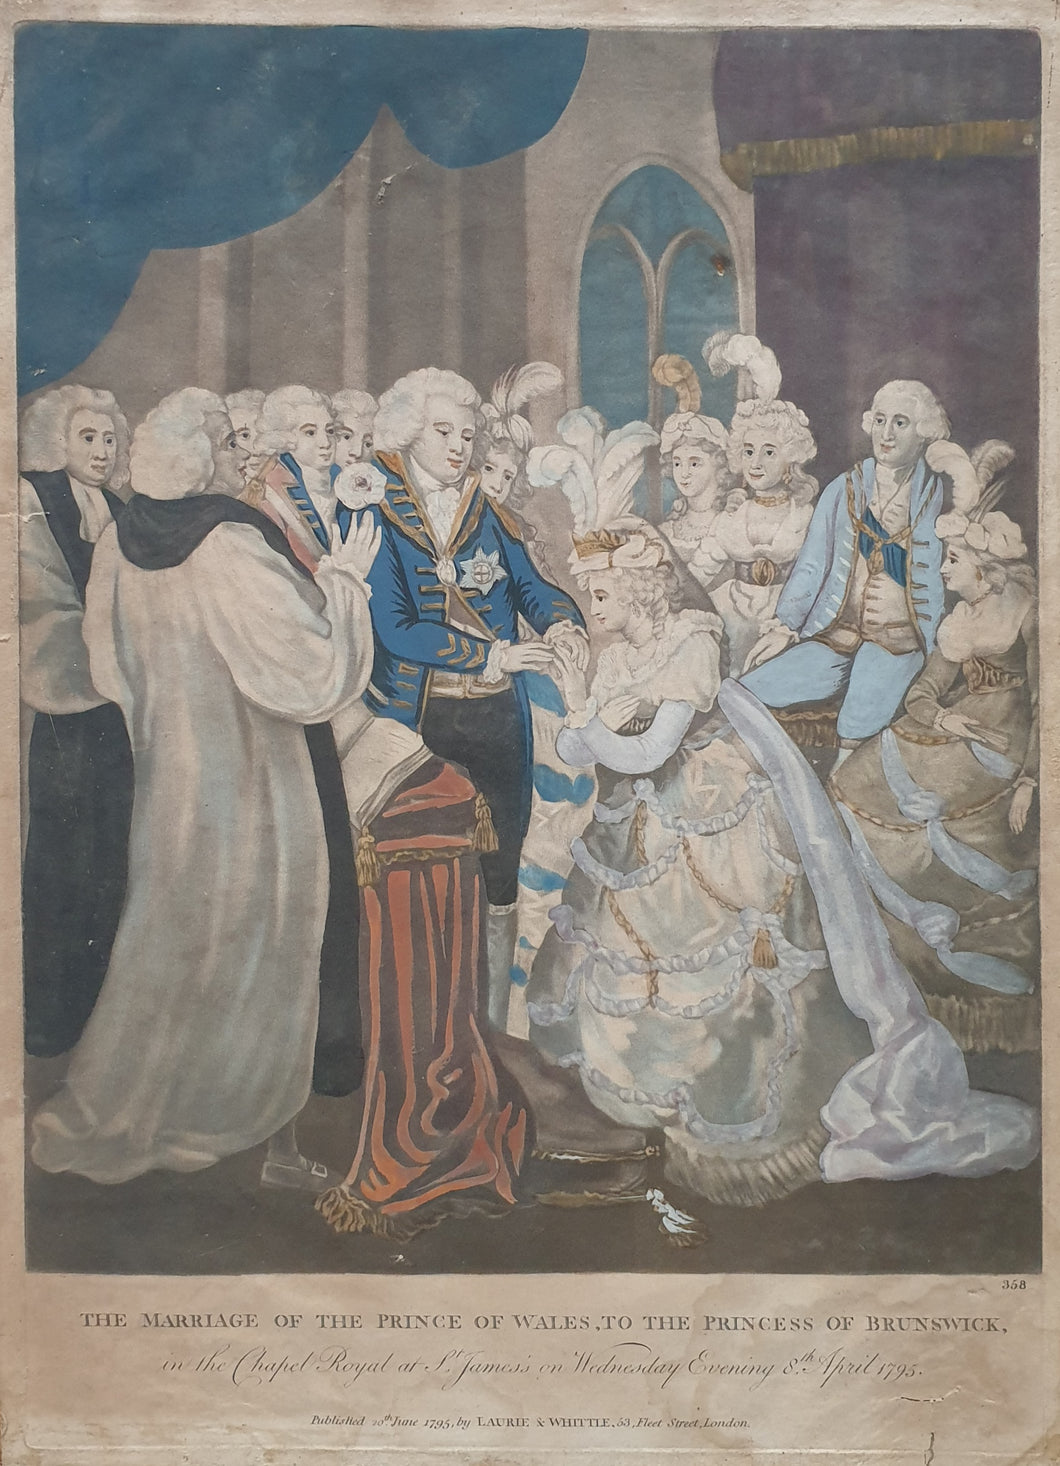 The Marriage Of The Prince Of Wales To The Princess Of Brunswick In The Chapel Royal At St James's On Wednesday Evening 8th April Hand Coloured Mezzotint Engraving 1795